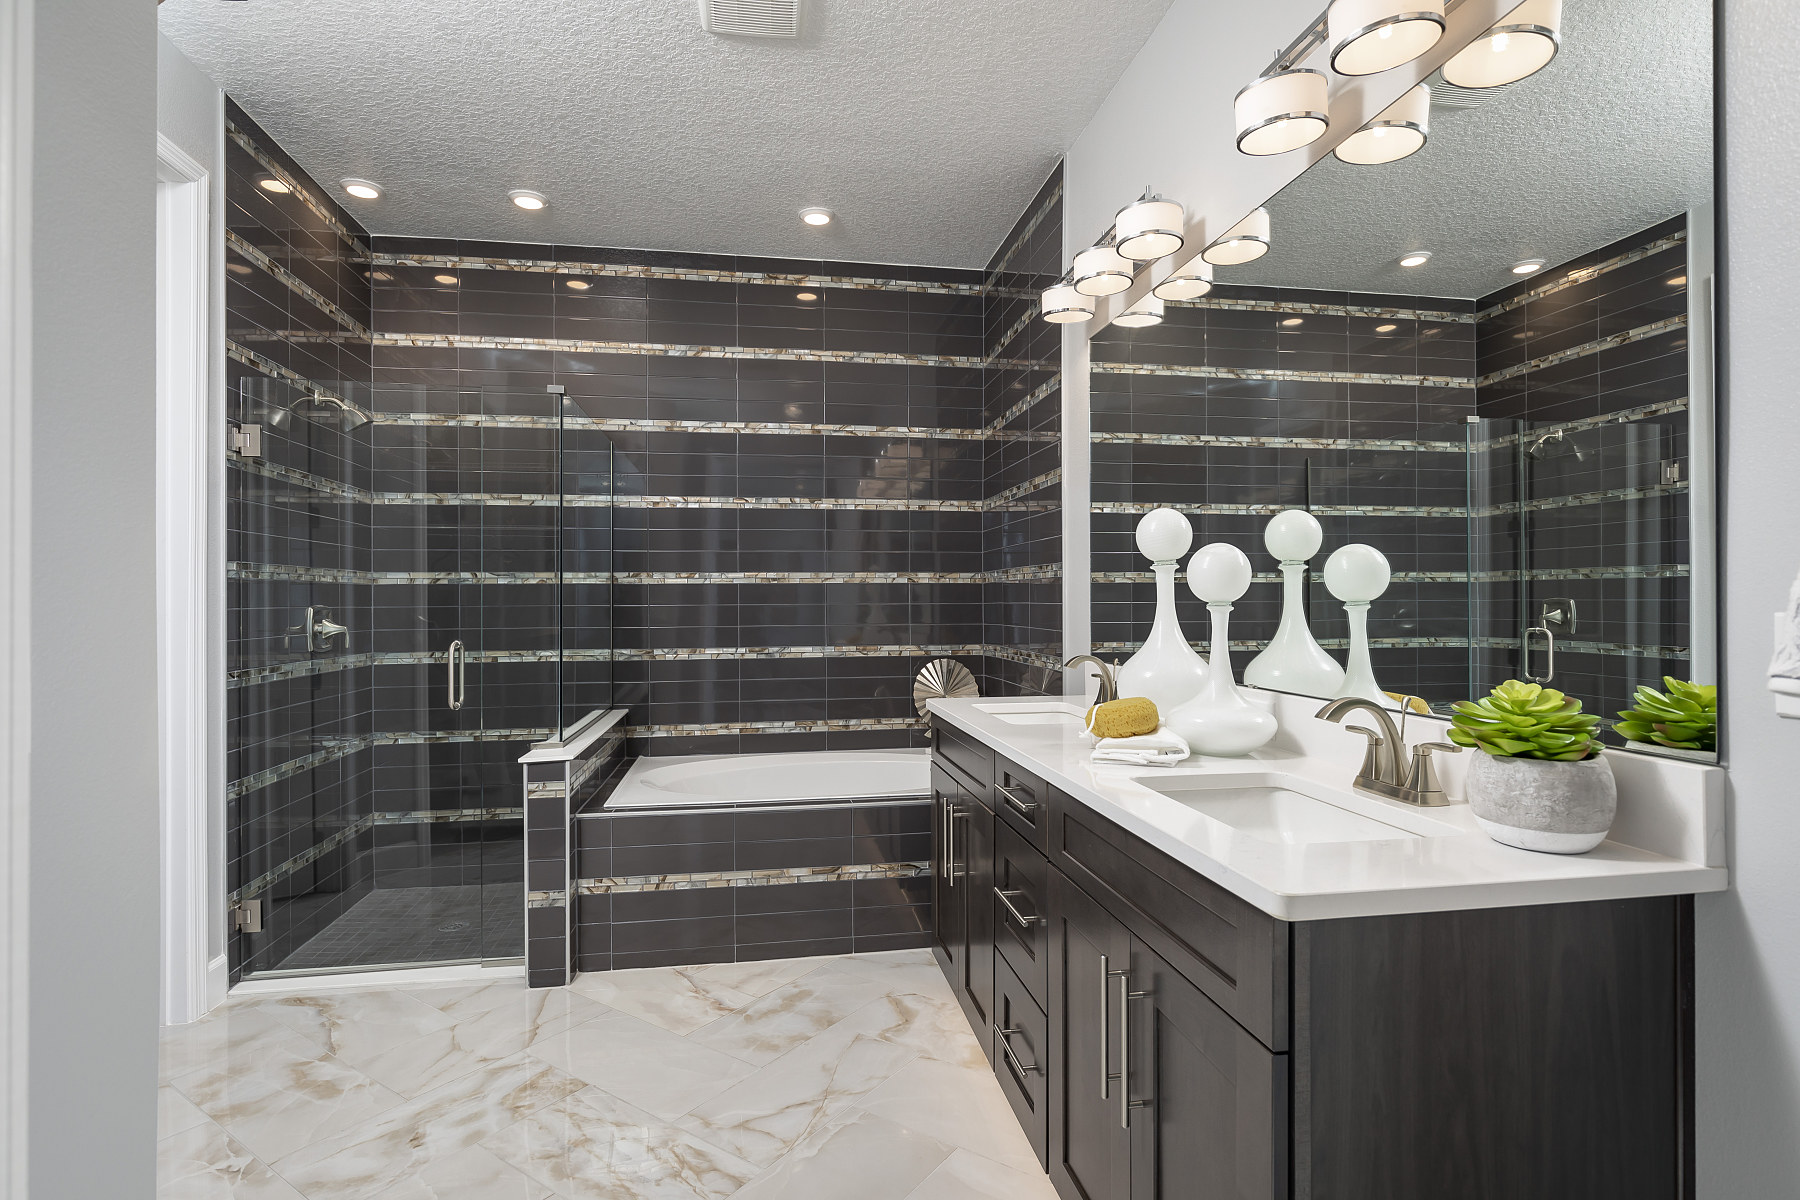 Owner's Bathroom With Dark Tile and Light-Painted Walls